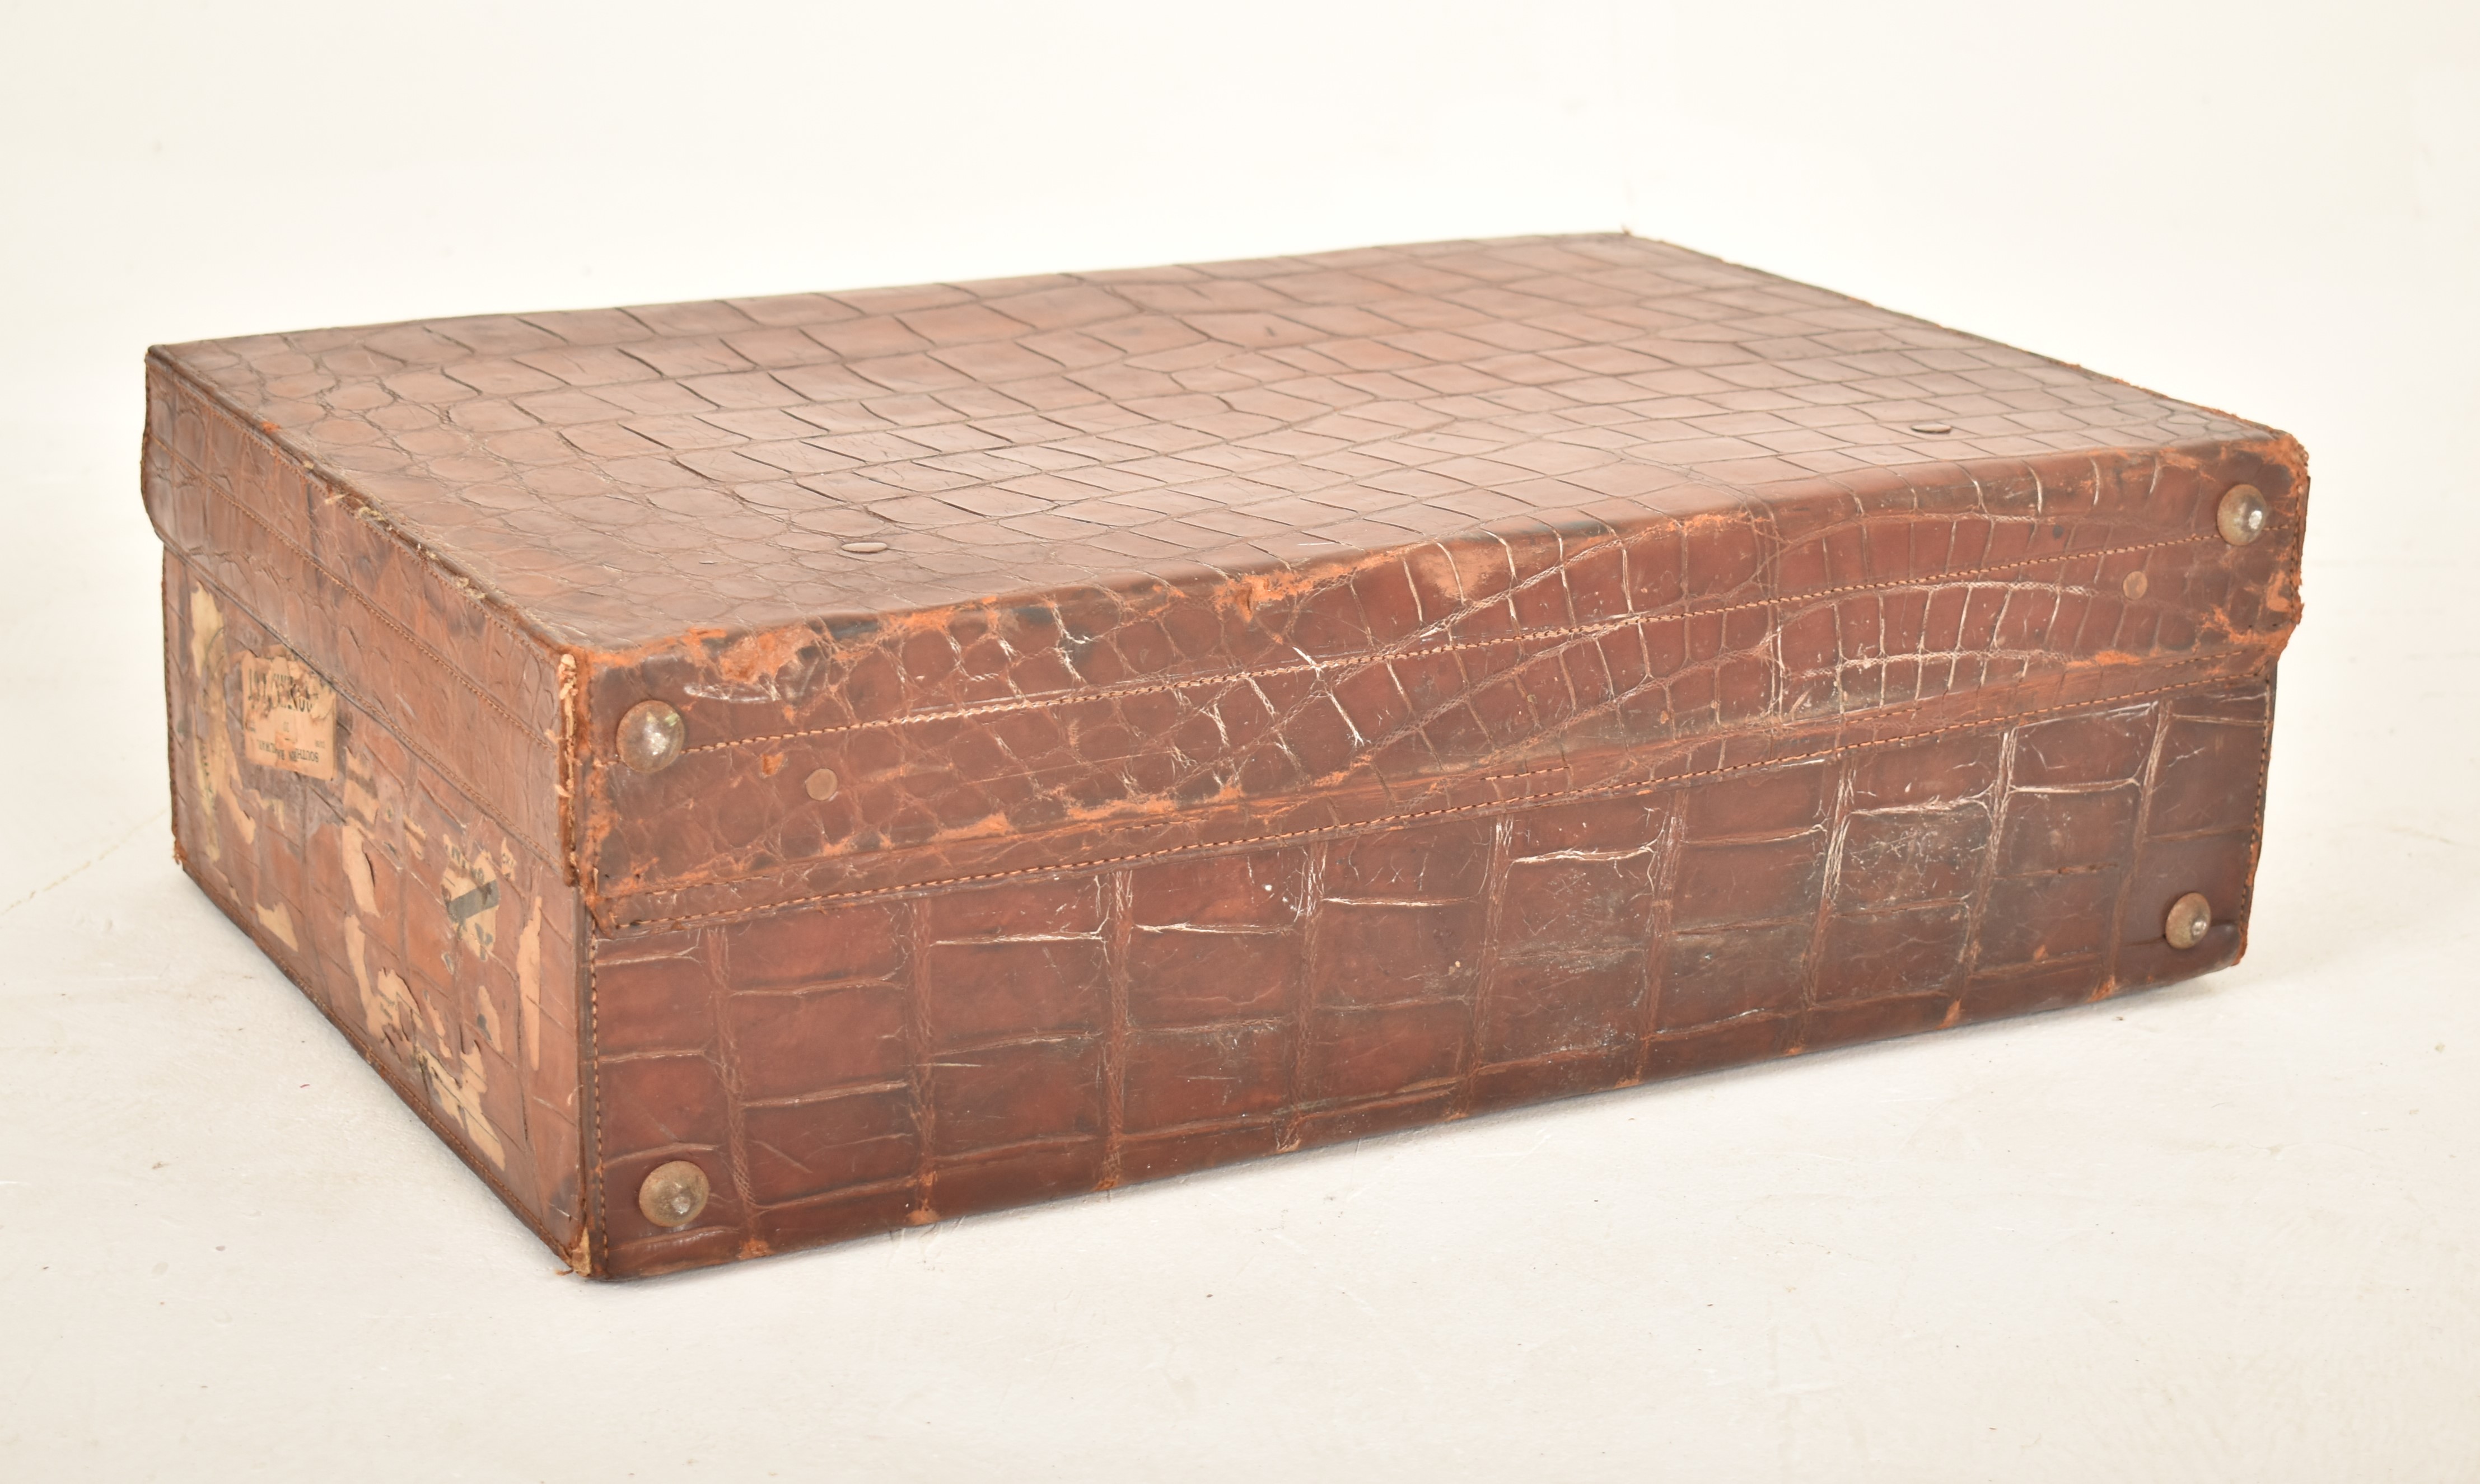 EARLY 20TH CENTURY CROCODILE SKIN LEATHER SUITCASE - Image 5 of 5